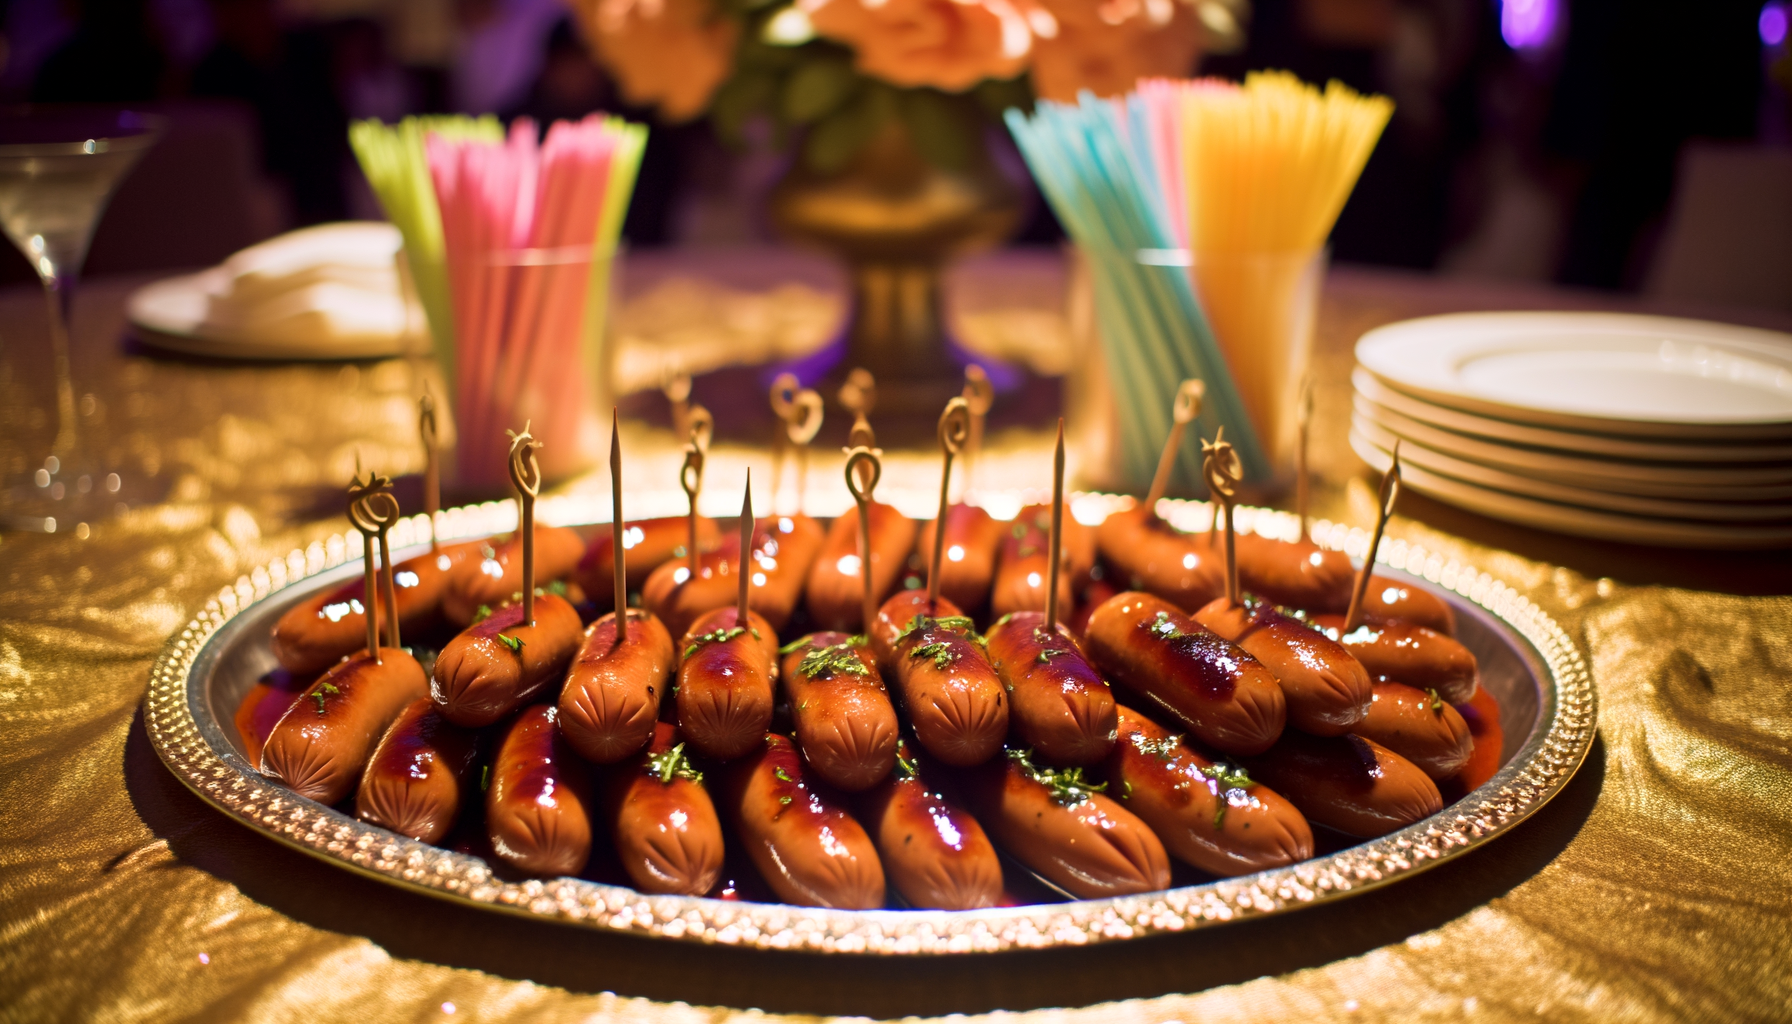 Glossy cocktail wieners garnished with herbs on an elegant platter convey a luxurious, appetizing party atmosphere.